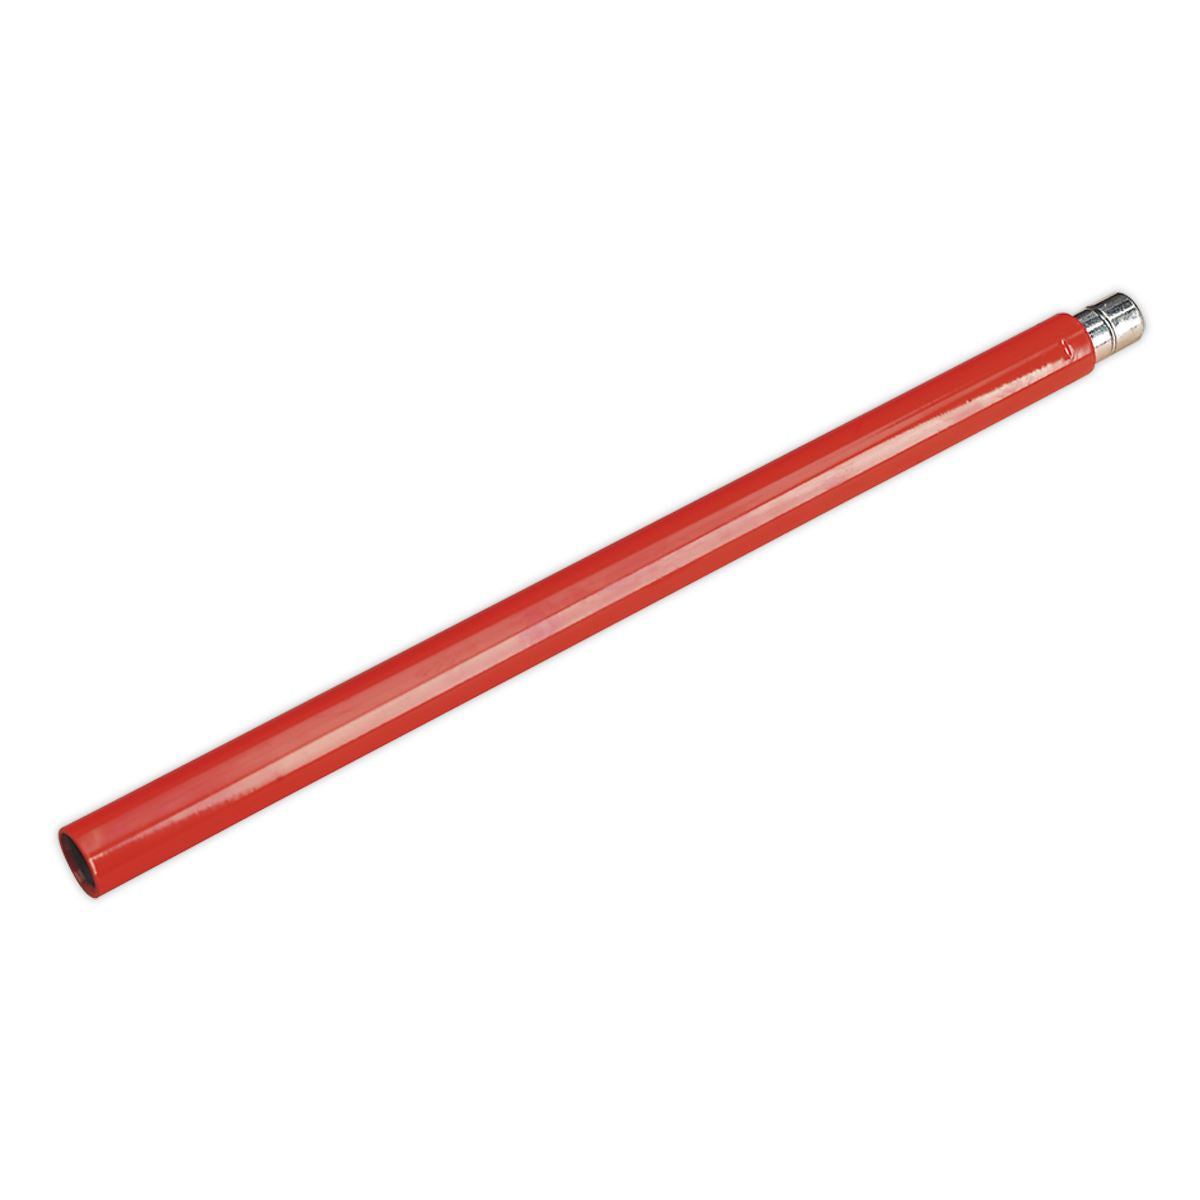 Sealey SuperSnap® Tube Extension 560mm